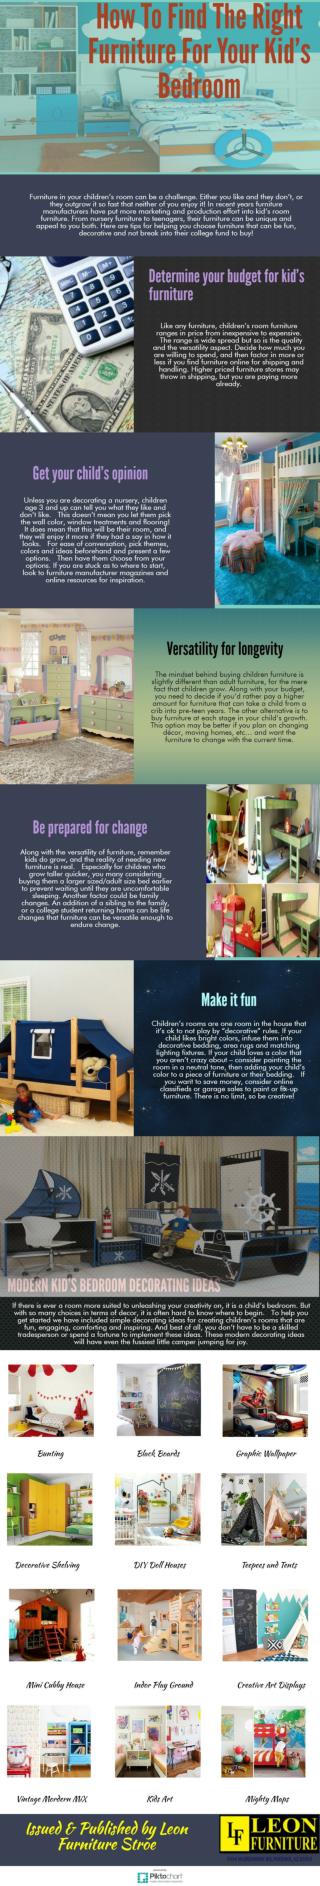 How To Find The Right Furniture For Your Kid’s Bedroom